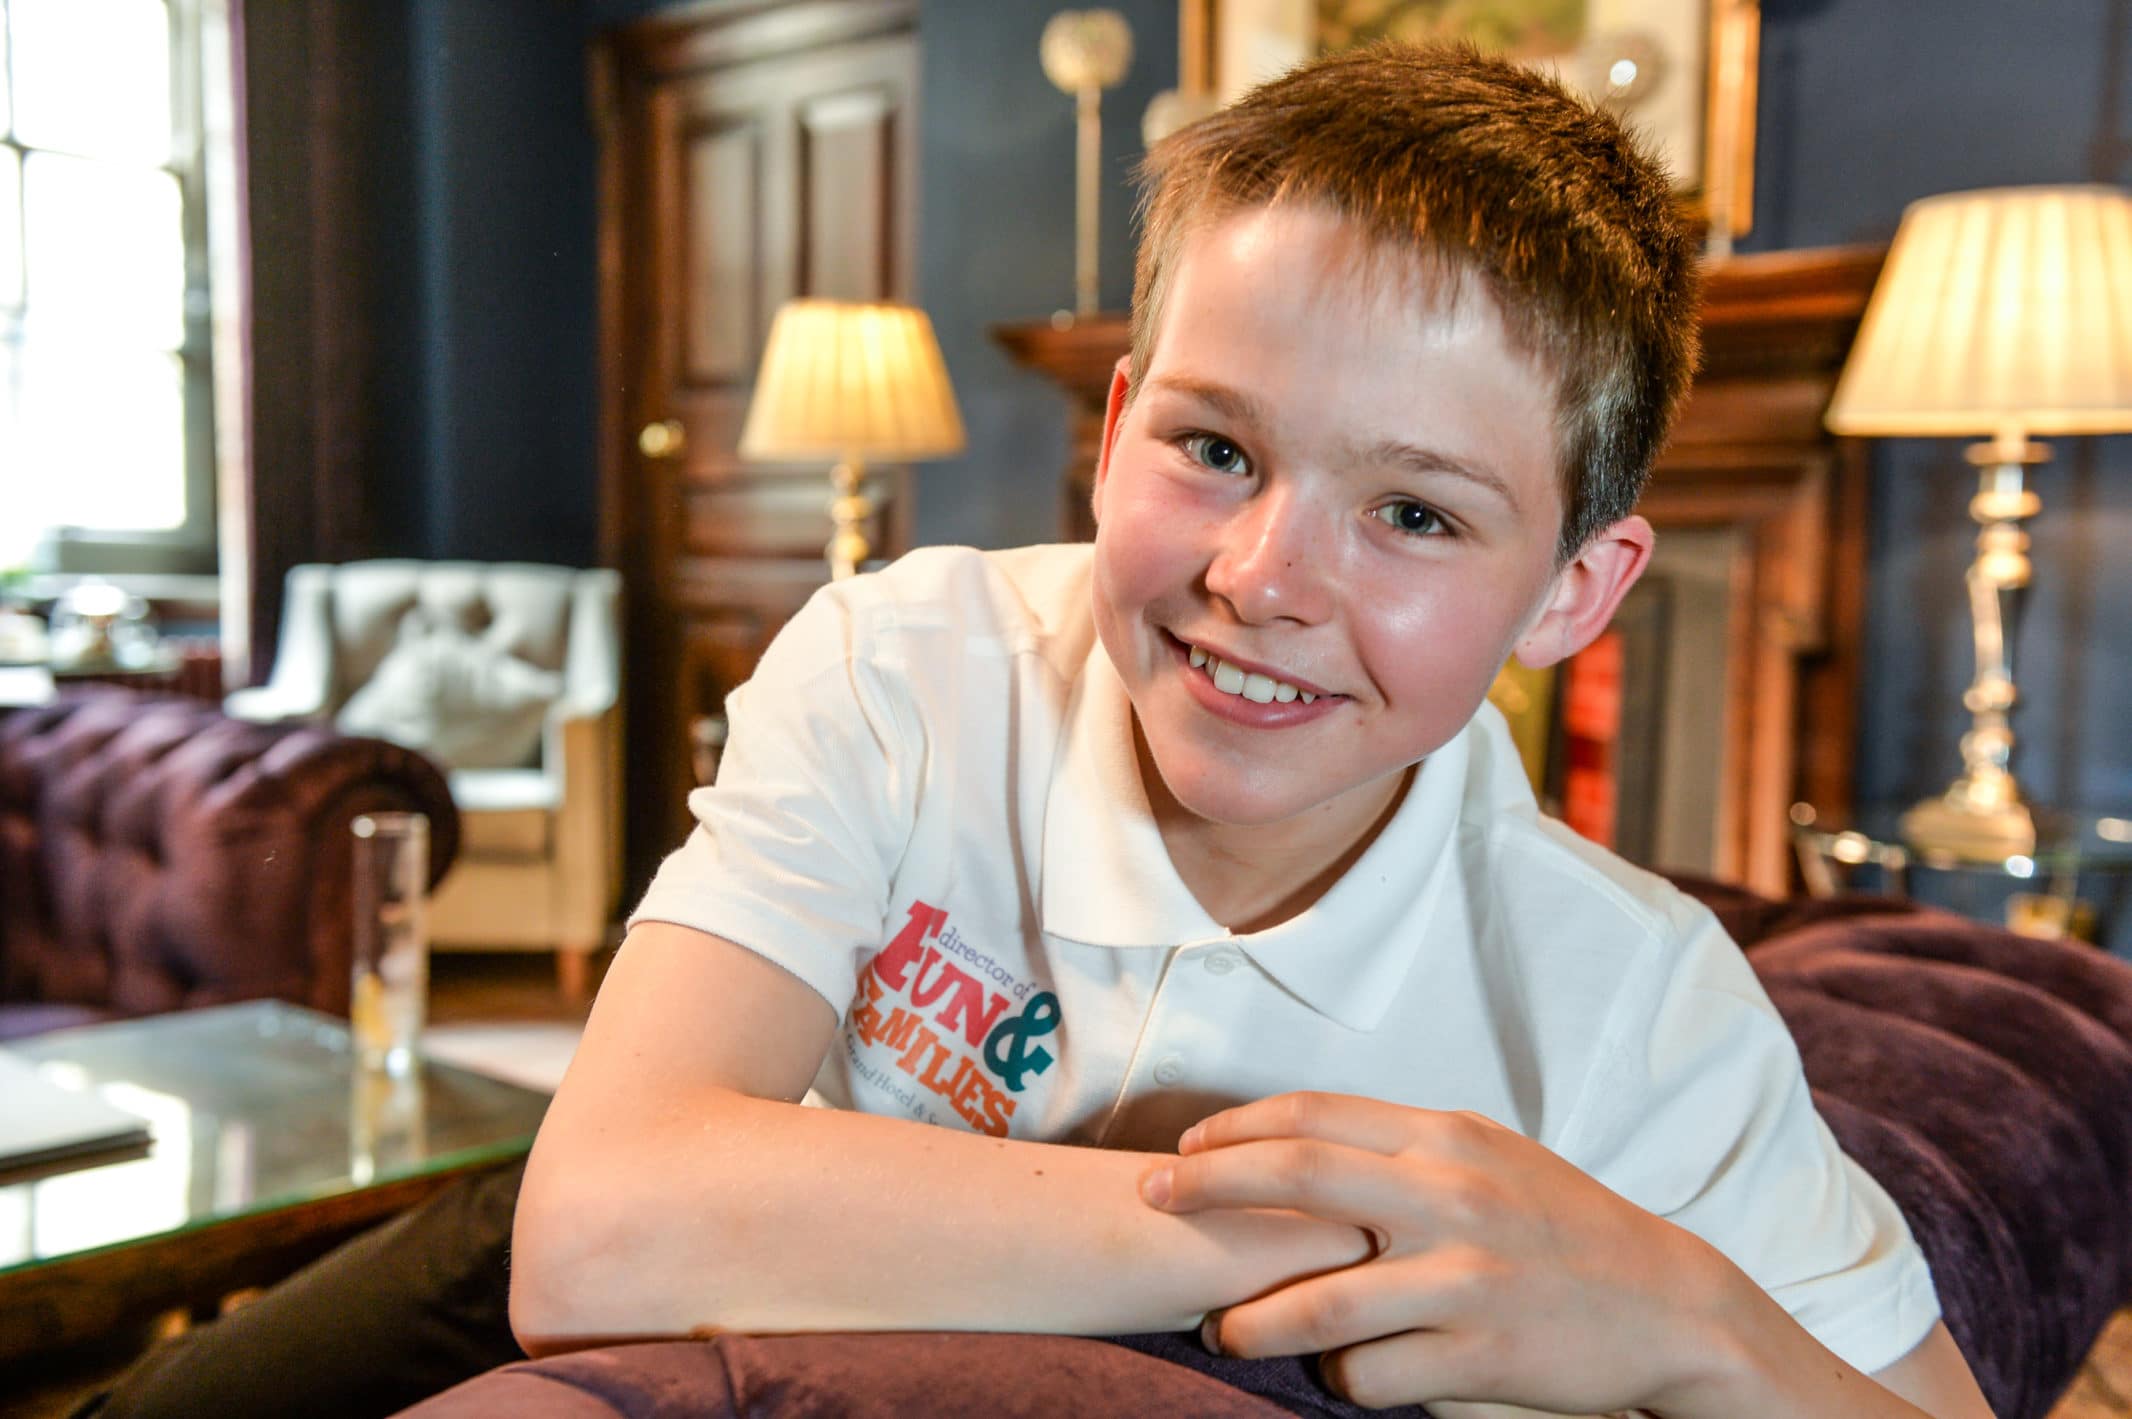 Sam Pointon, the hotel's director of Fun and Families